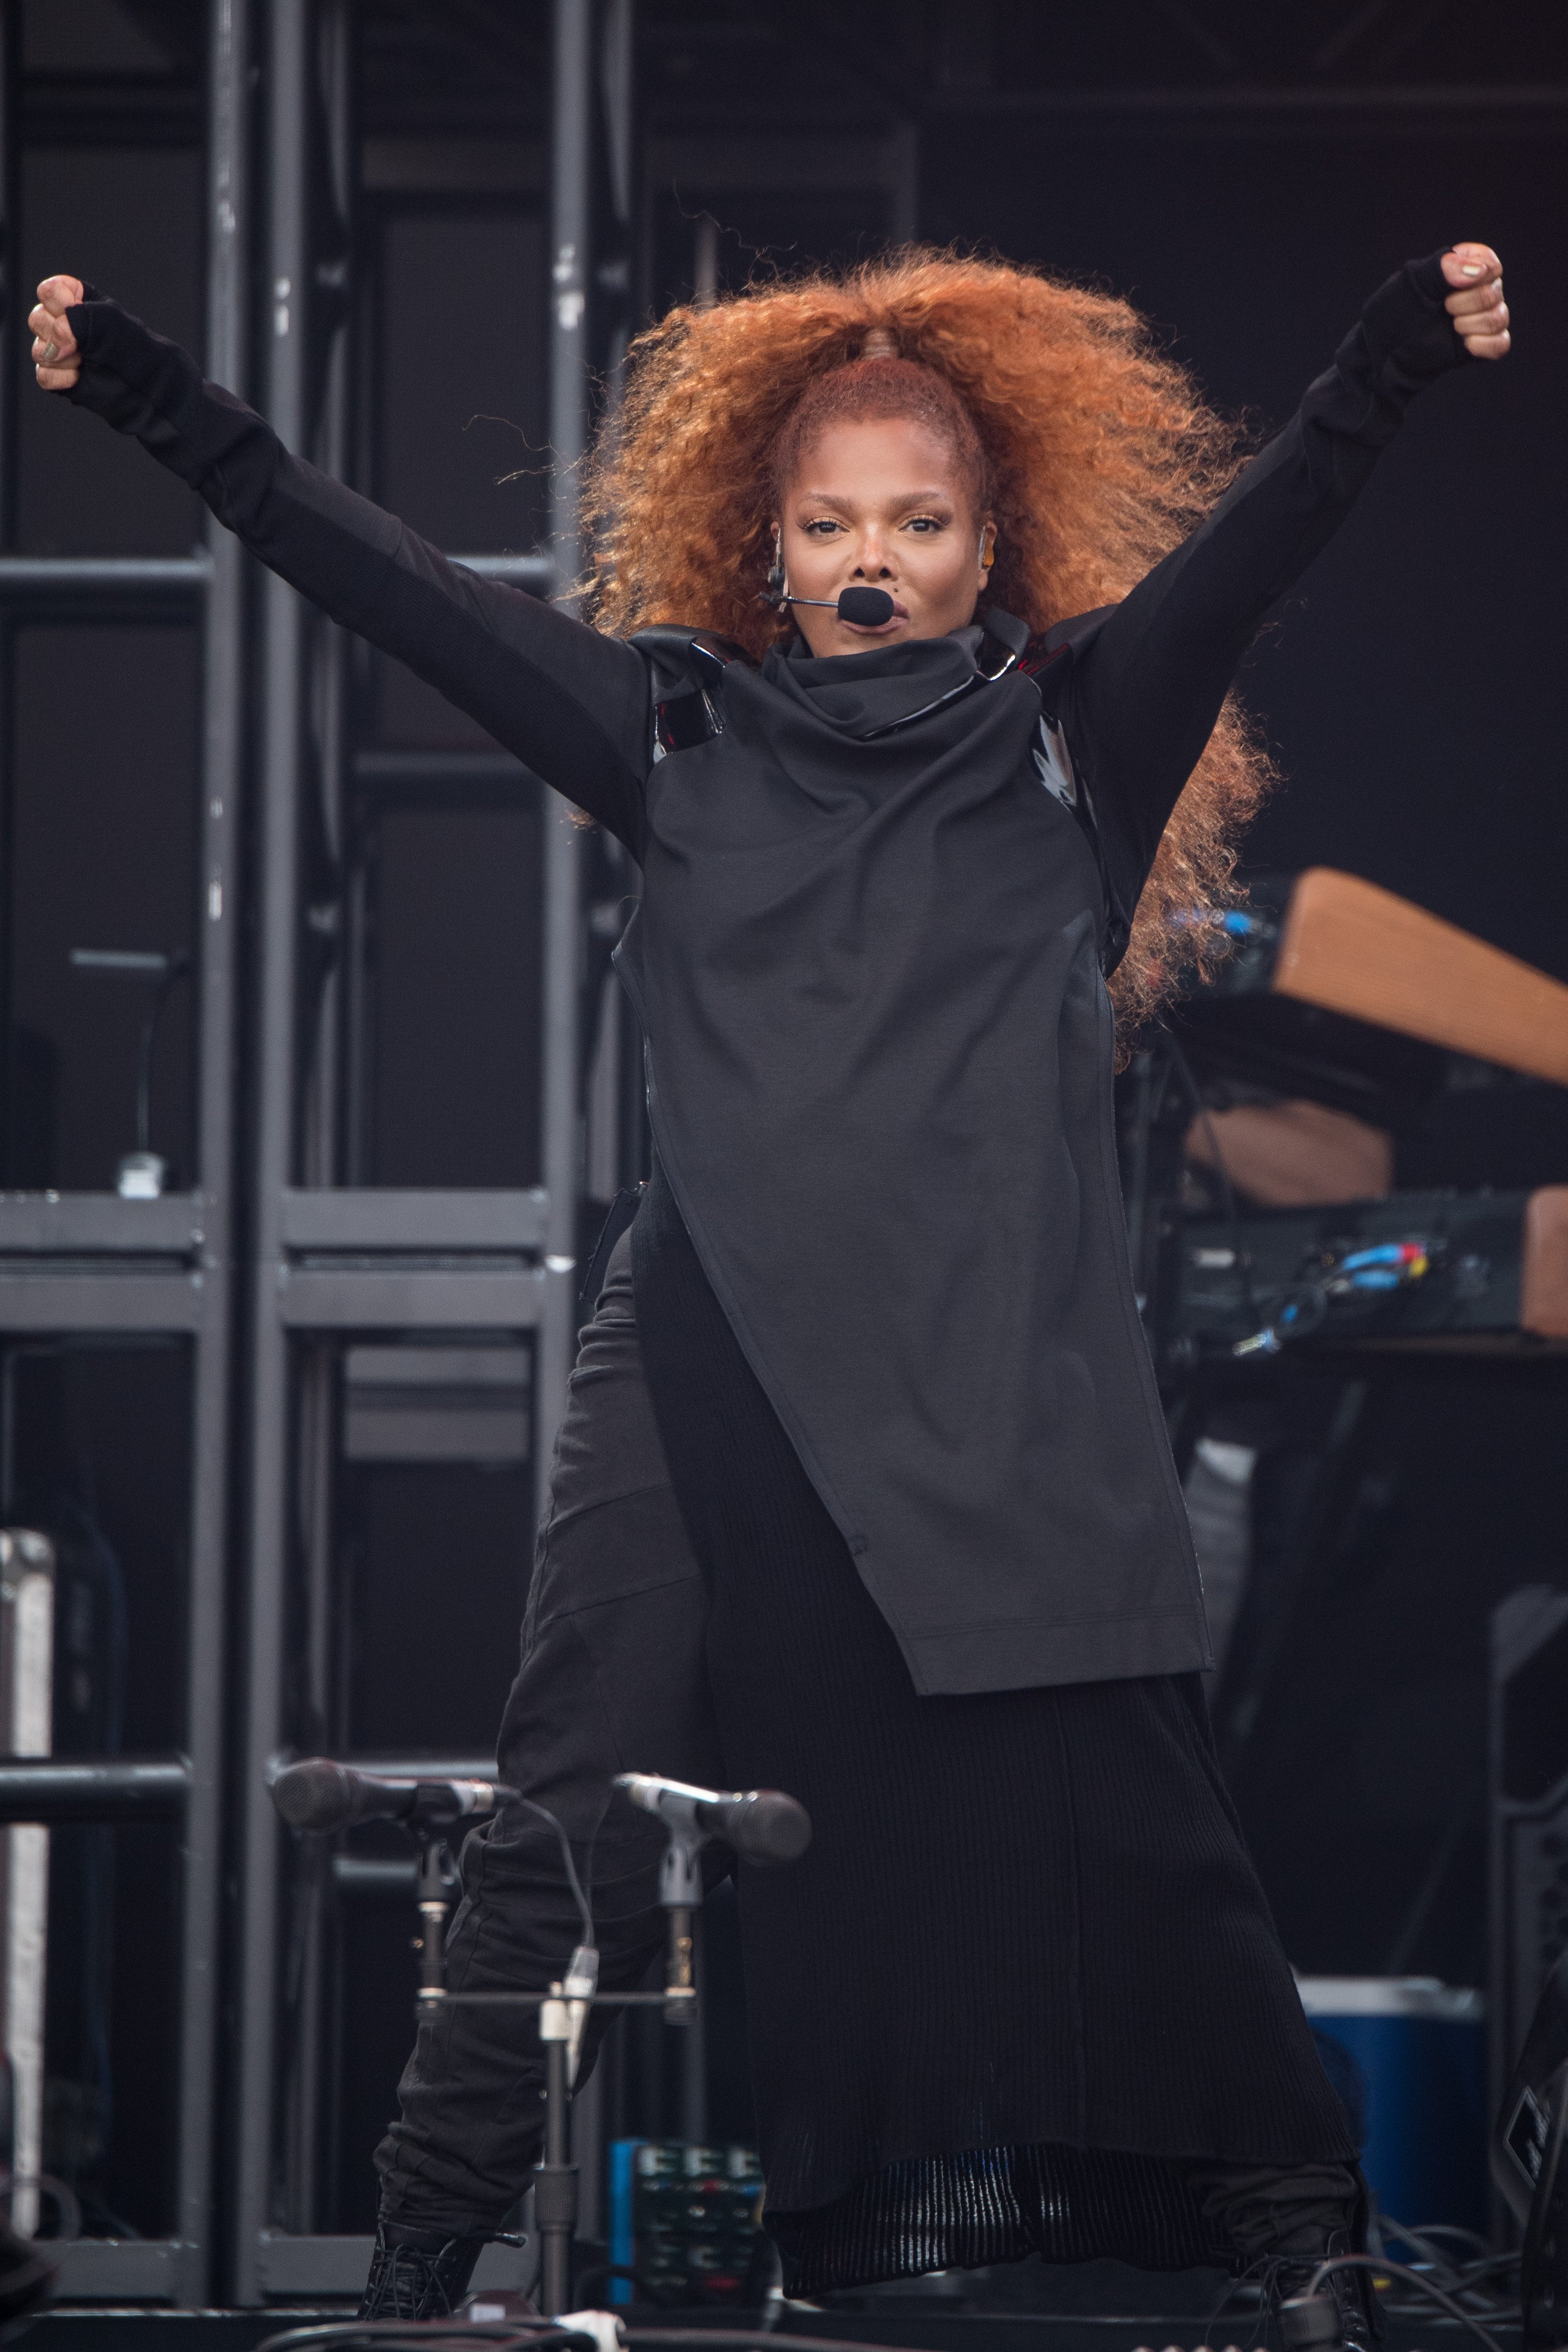 Janet Jackson performing at the Glastonbury Festival on June 29, 2019 in Glastonbury, England. | Photo: Getty Images